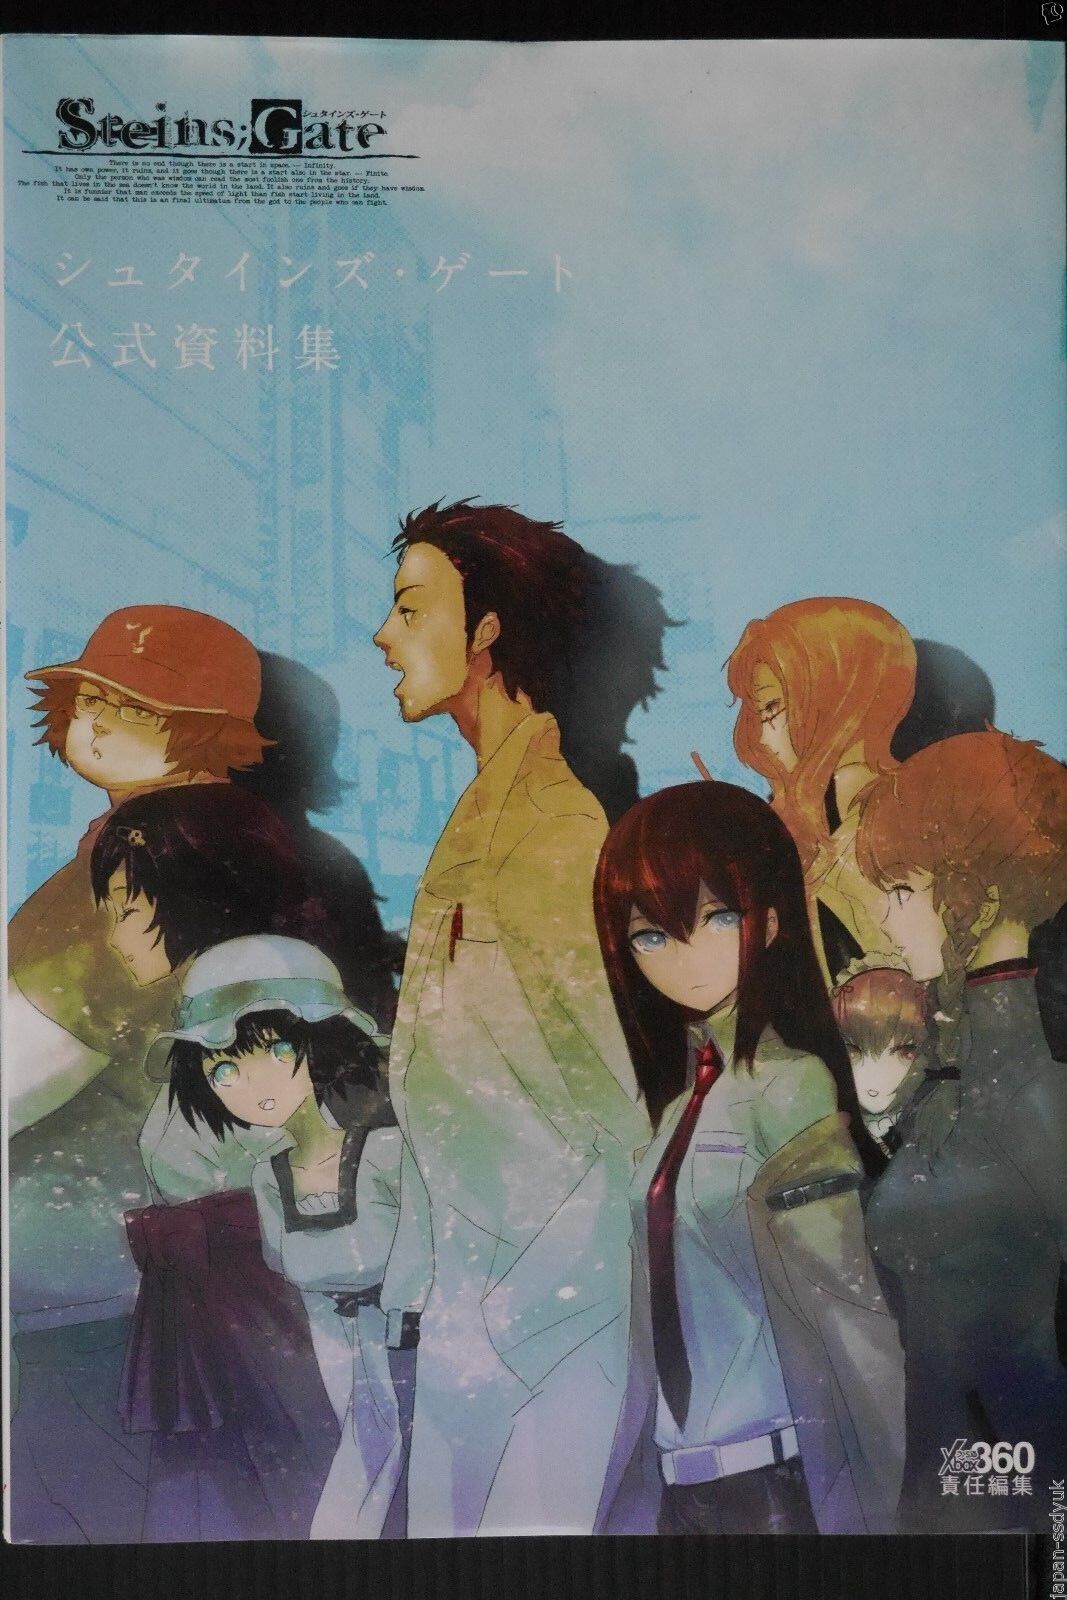 Steins;Gate: Official Shiryoushuu Art Book from Japan